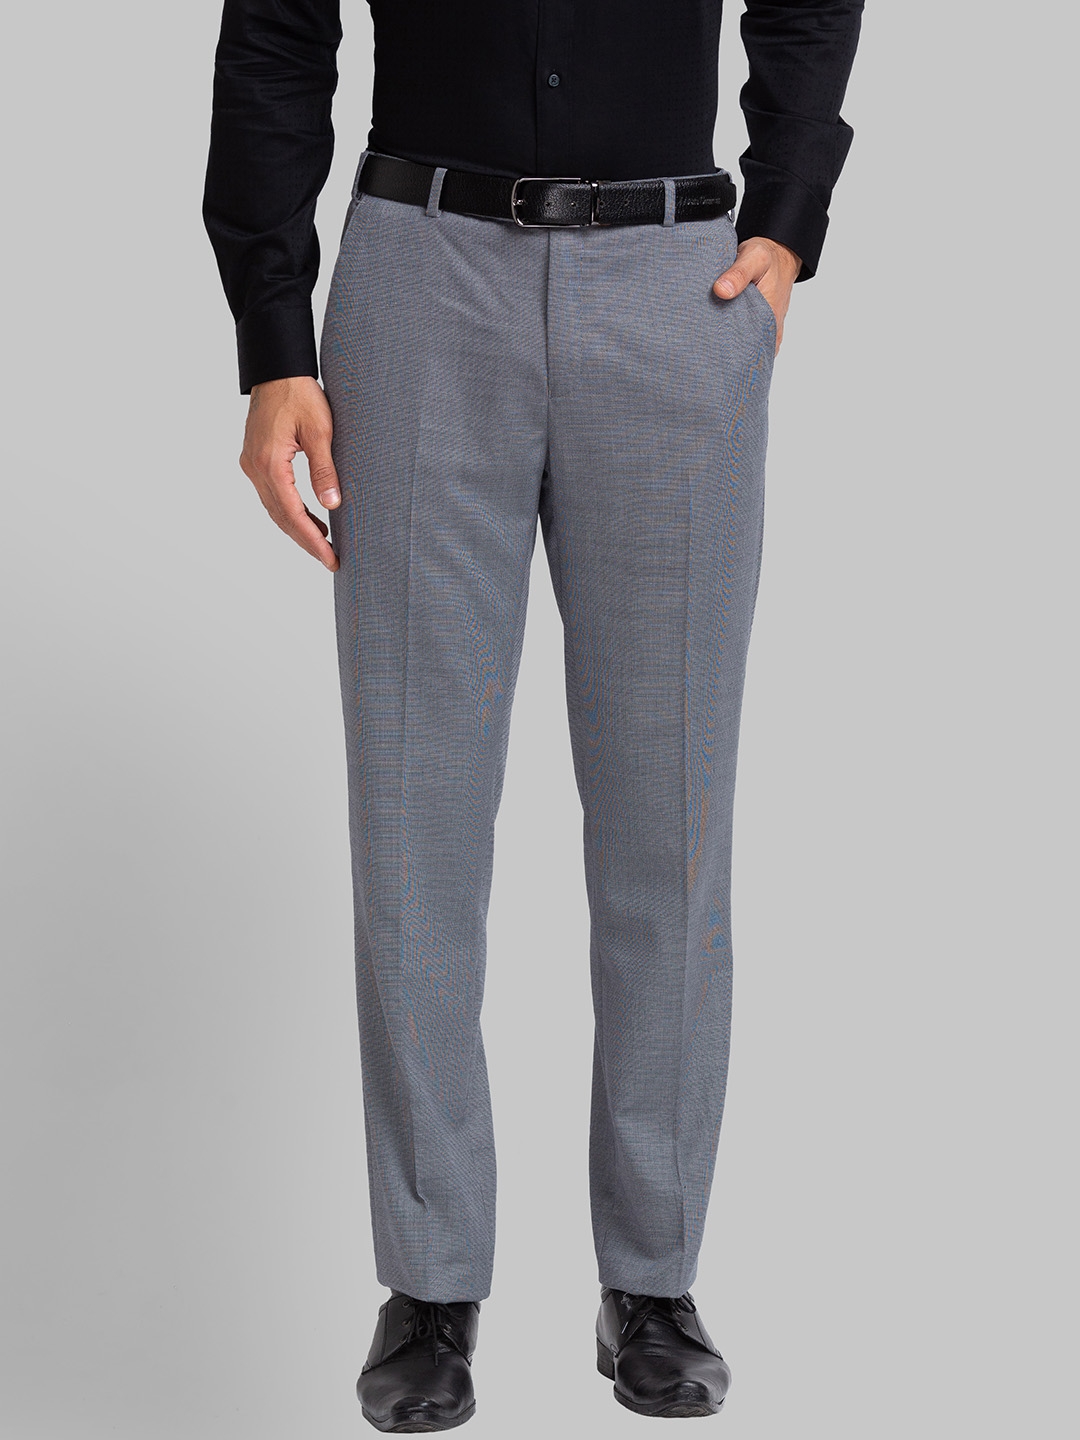 Raymond Men's Flat Front Contemporary Fit Dark Blue Formal Trouser :  Amazon.in: Fashion